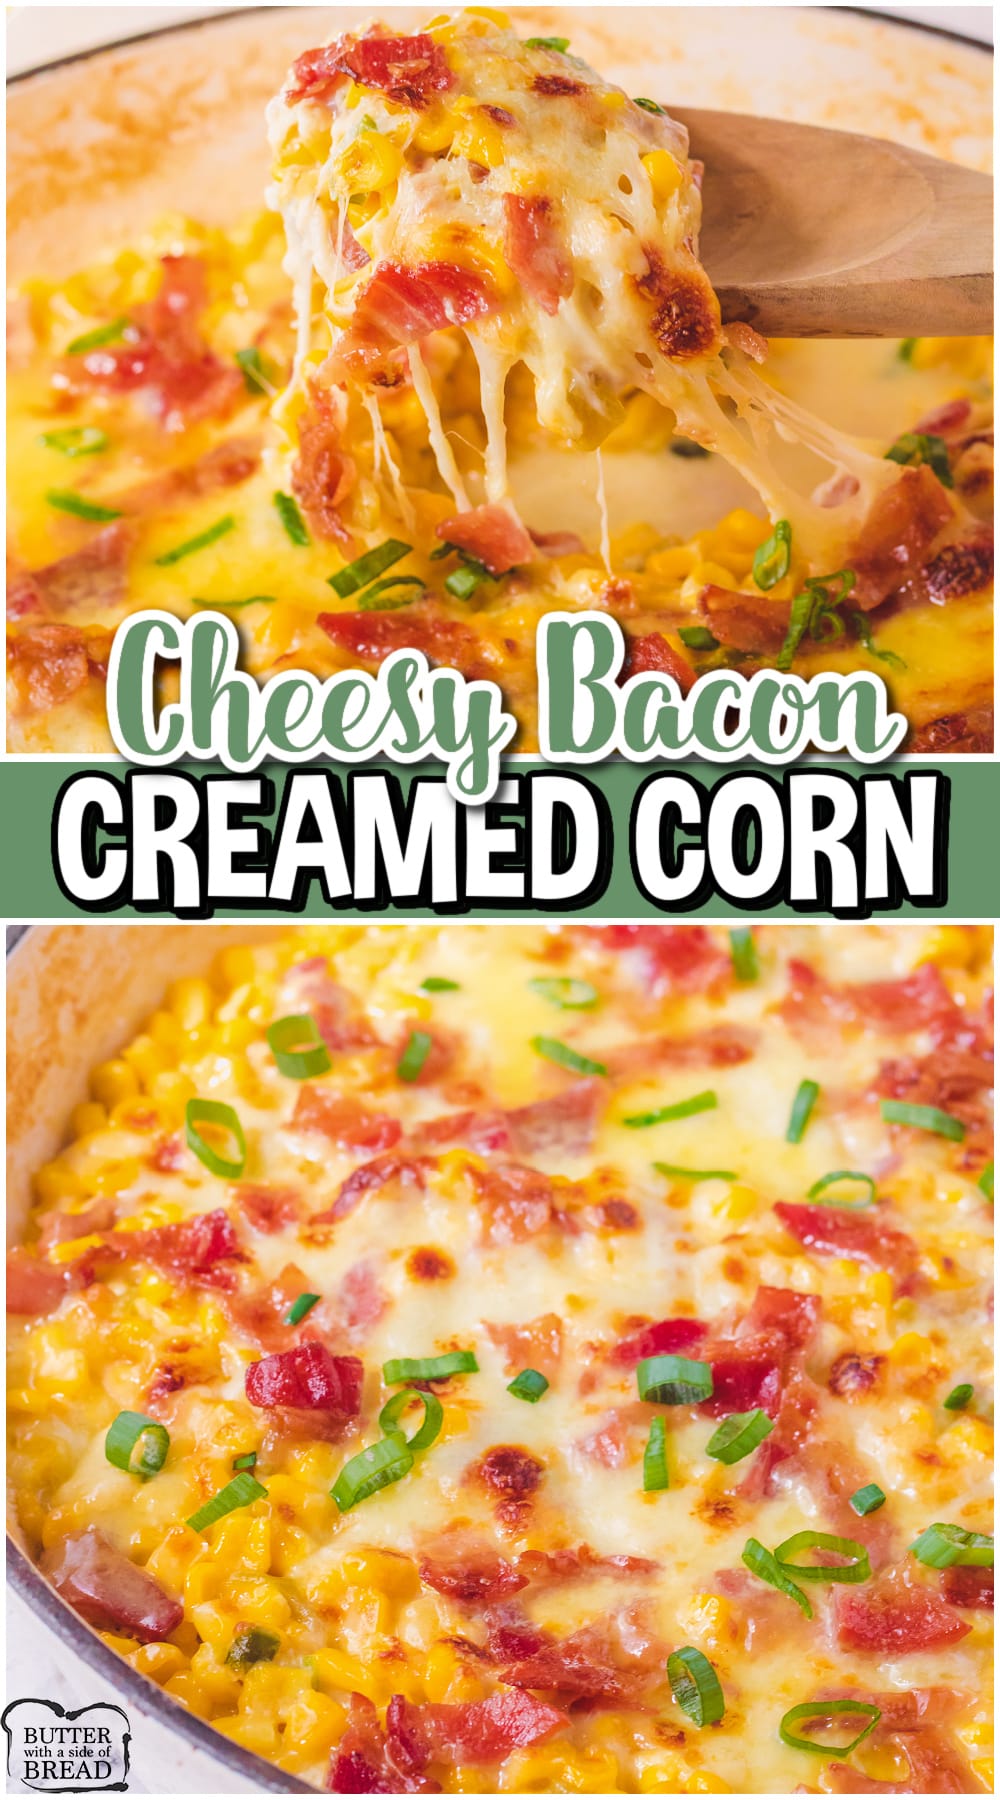 Cheesy Bacon Creamed Corn is a perfect side dish to bring to any backyard BBQ, Tailgate party, or holiday feast. This baked cream corn with bacon is a classic comfort dish that is packed with delicious flavor! 